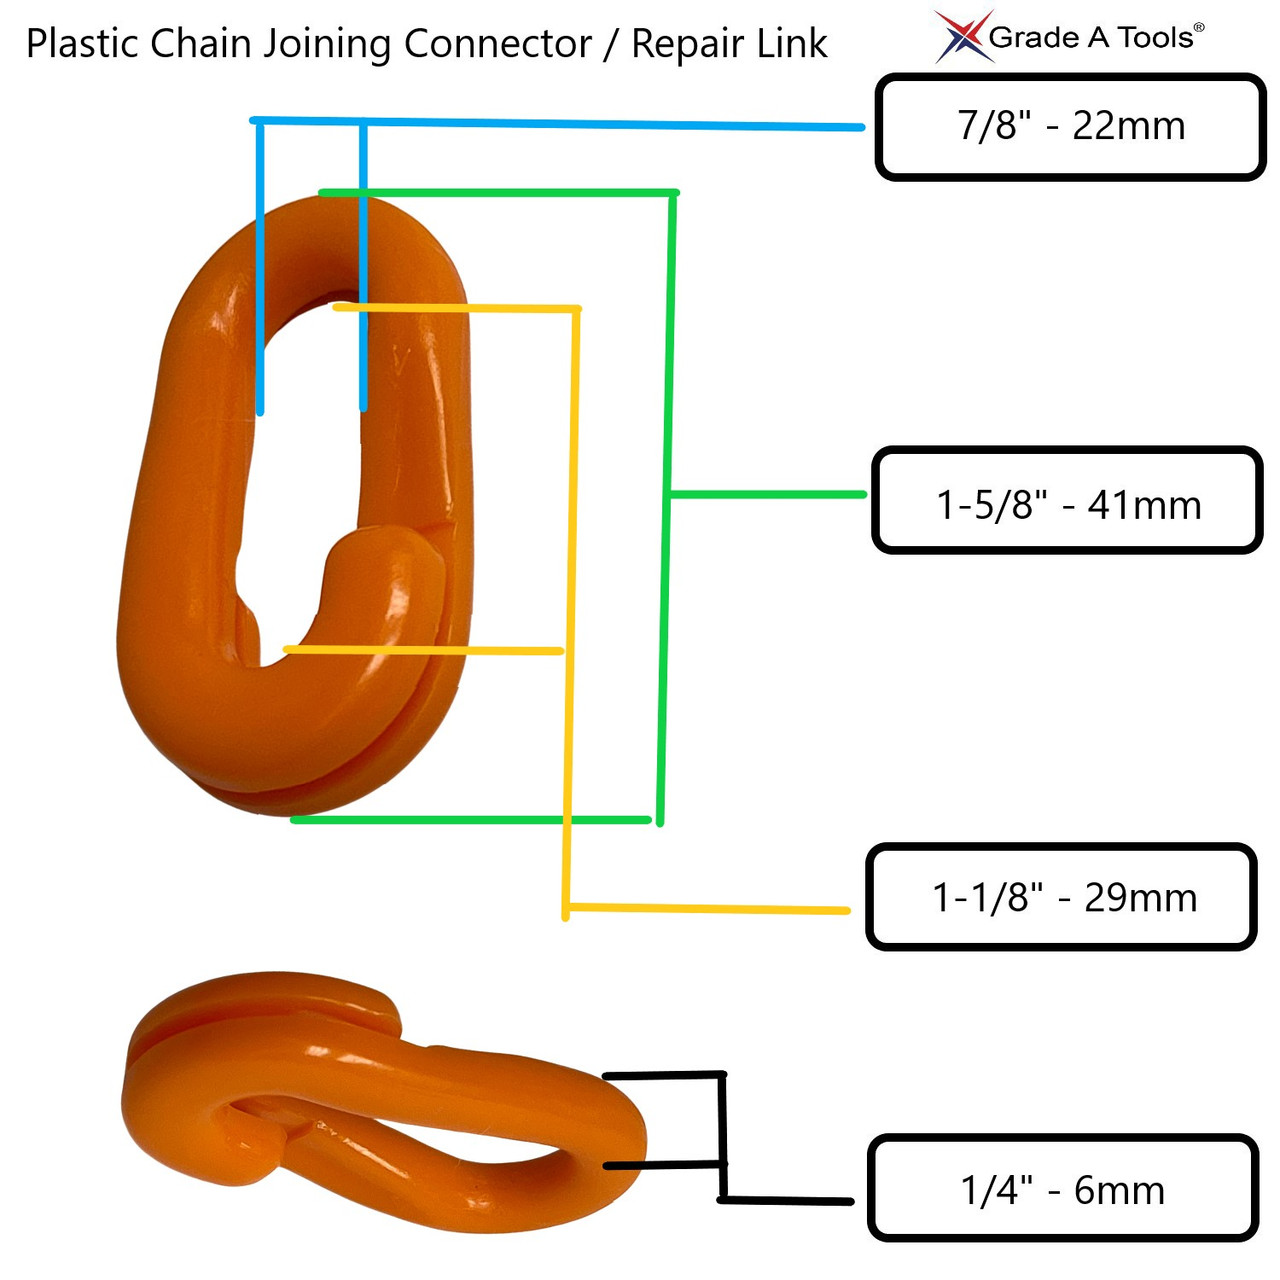 Plastic Safety Chain Orange Repair  joining  Link connector  1-5/8" X 1/4" (41mm X 6mm) B